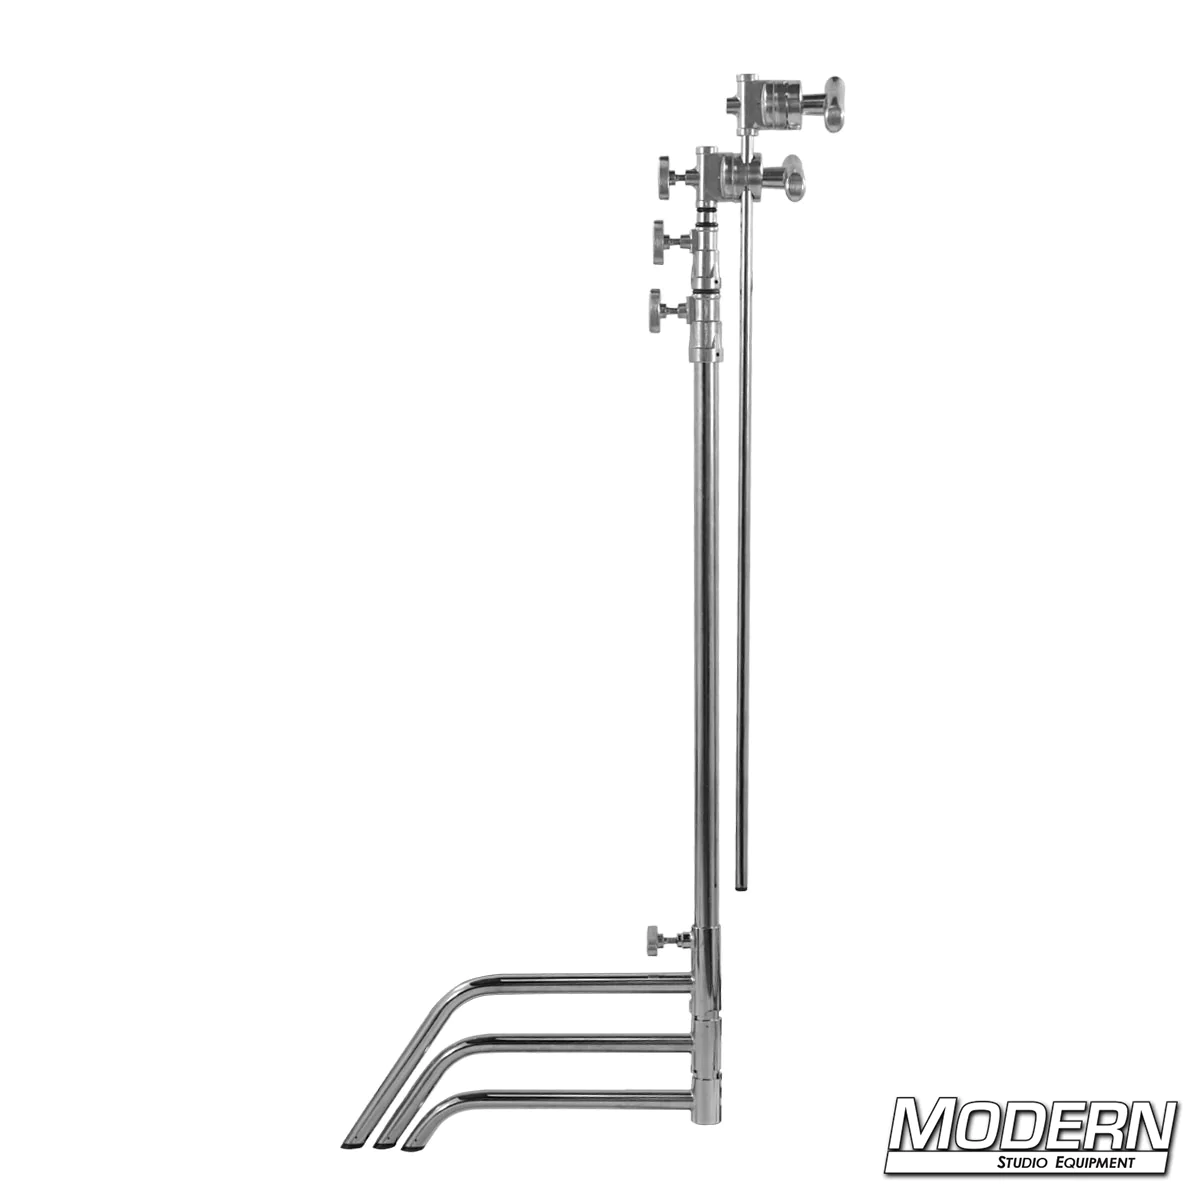 40-inch C-Stand Complete With Grip Head & 40-inch Extension Arm (Norms Brand)